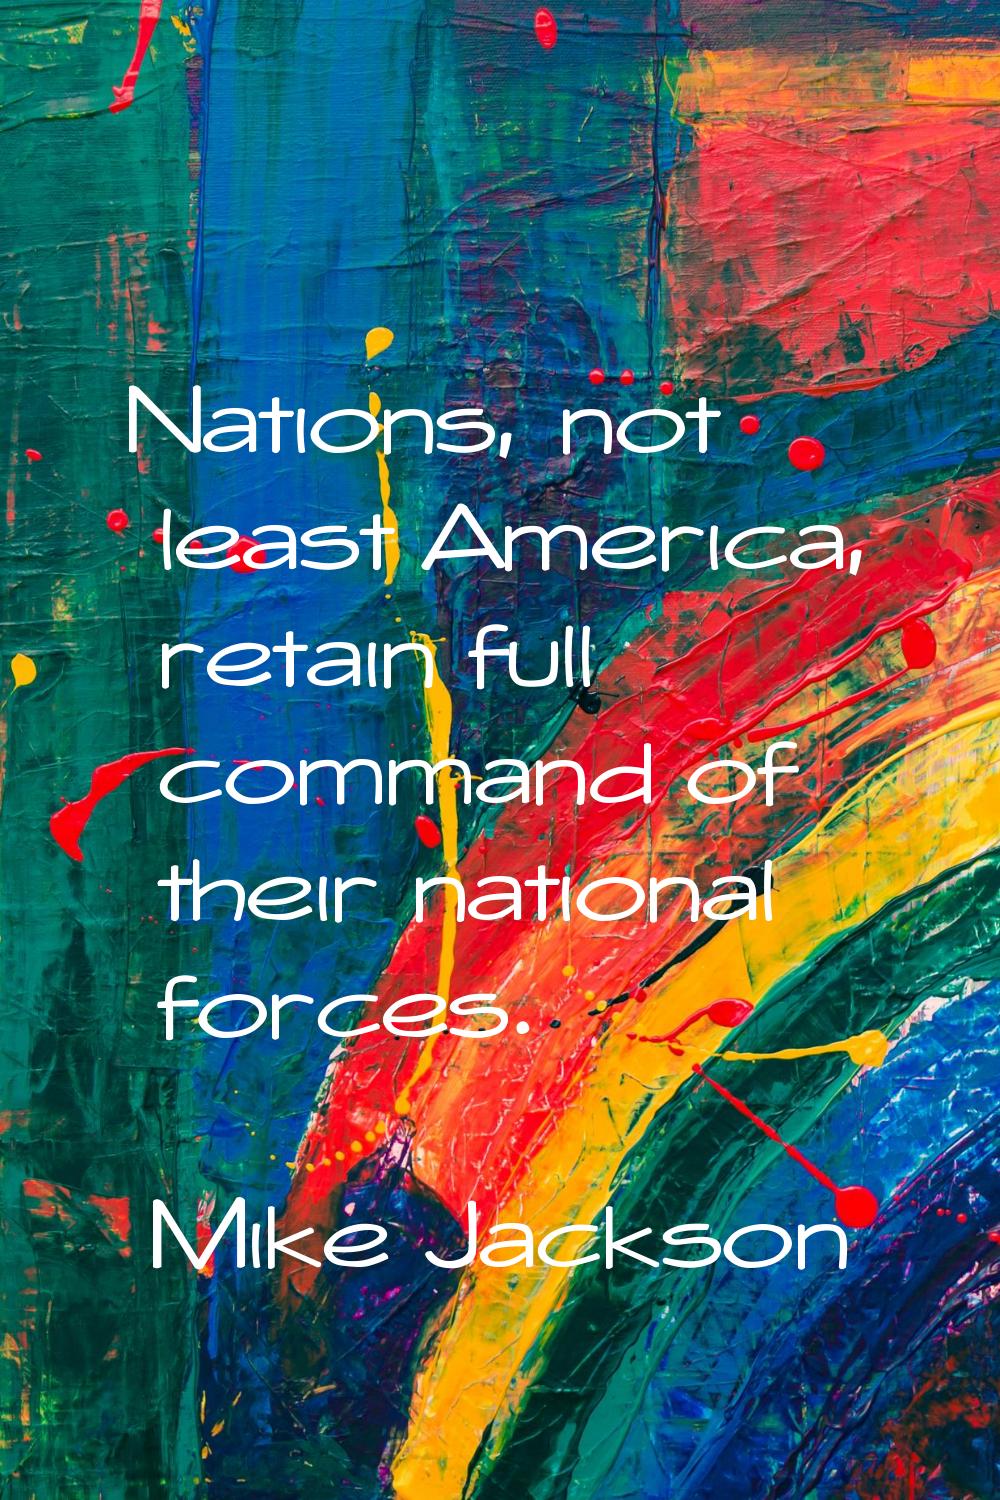 Nations, not least America, retain full command of their national forces.